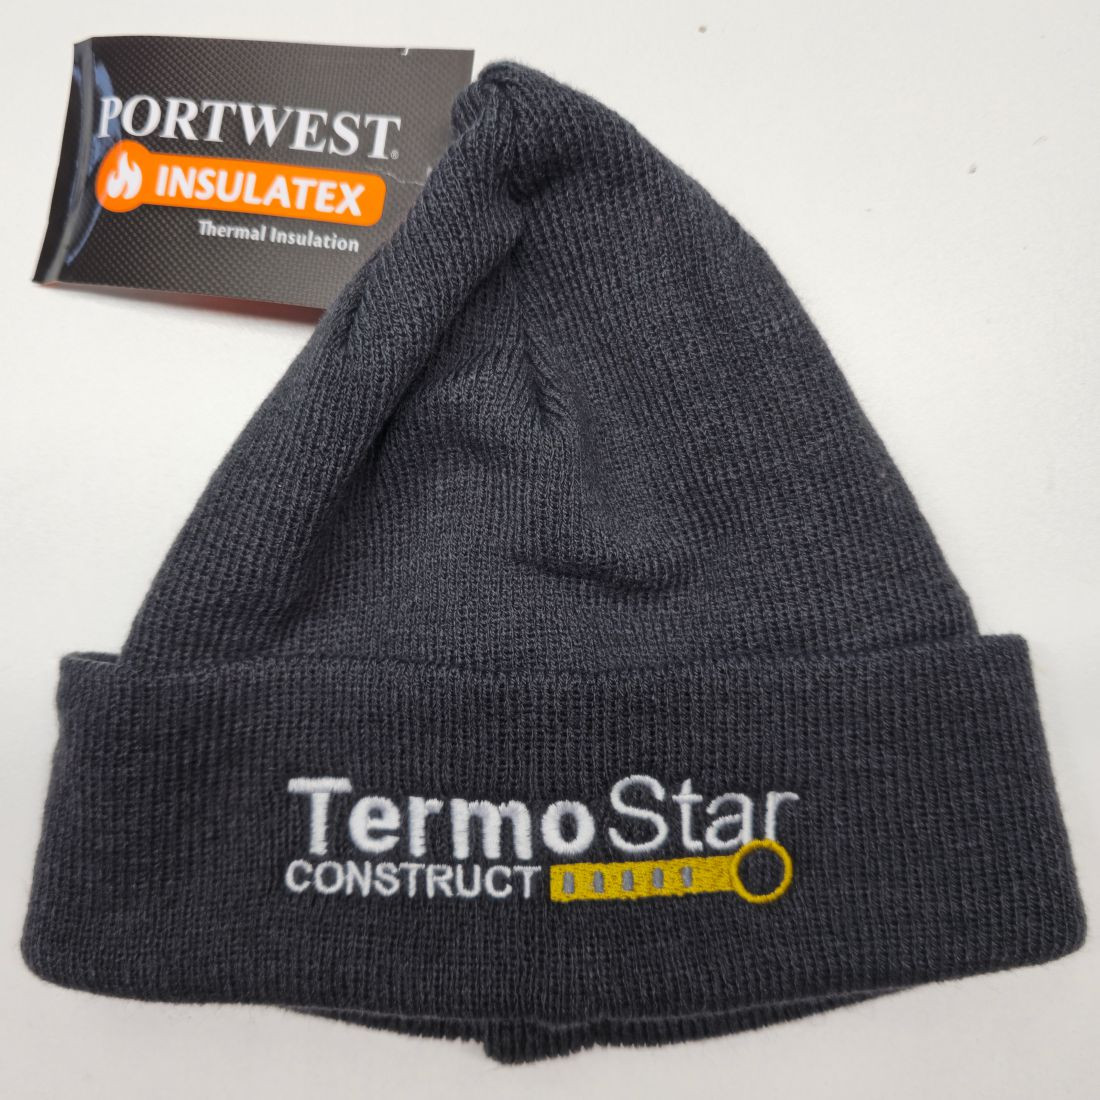 Insulated Knit Cap Insulatex® Lined - Safetywear